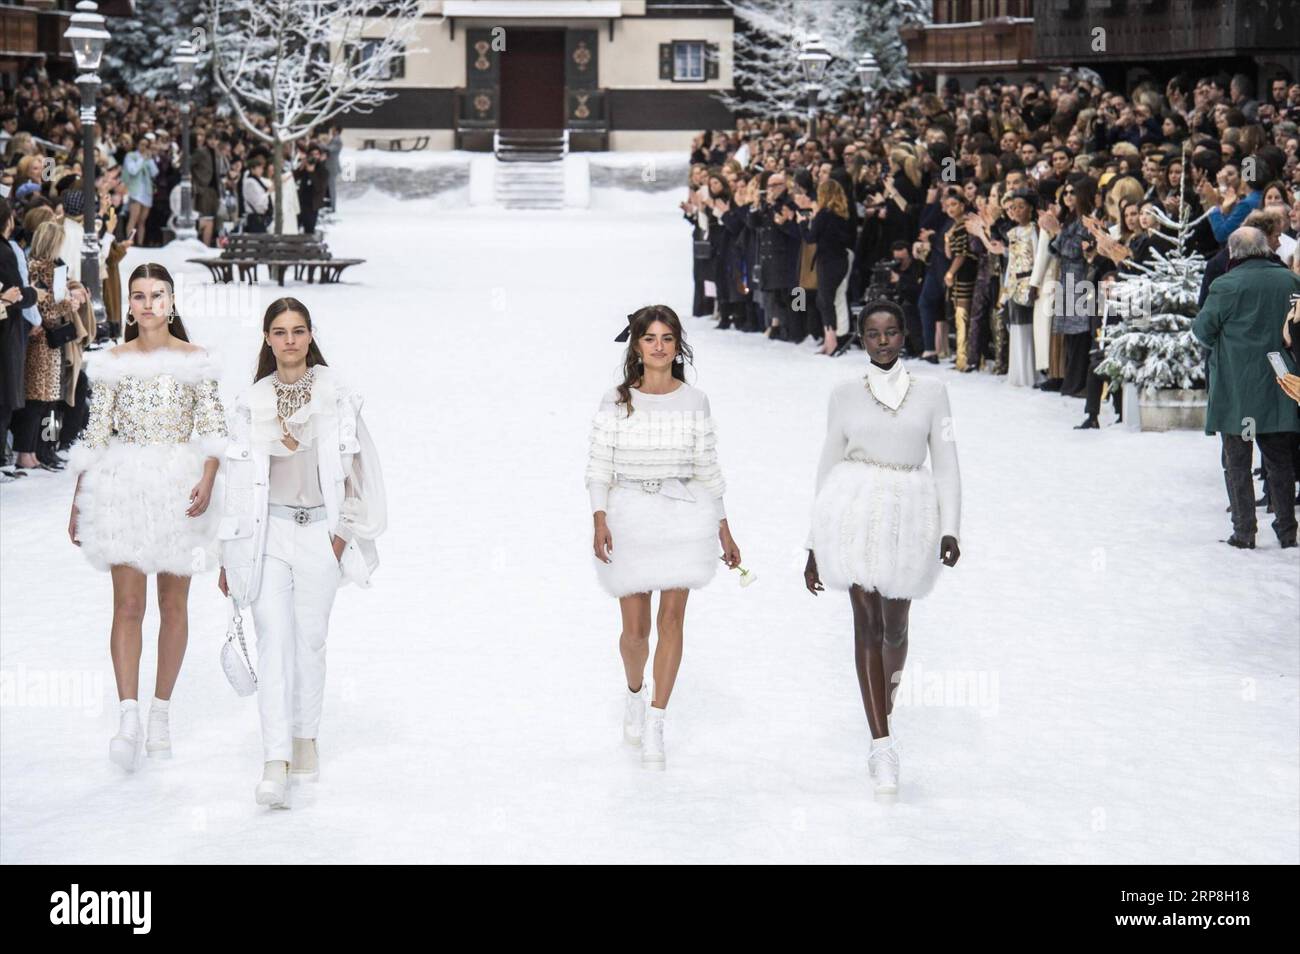 The most standout moments from Chanel's autumn/winter 2019 show